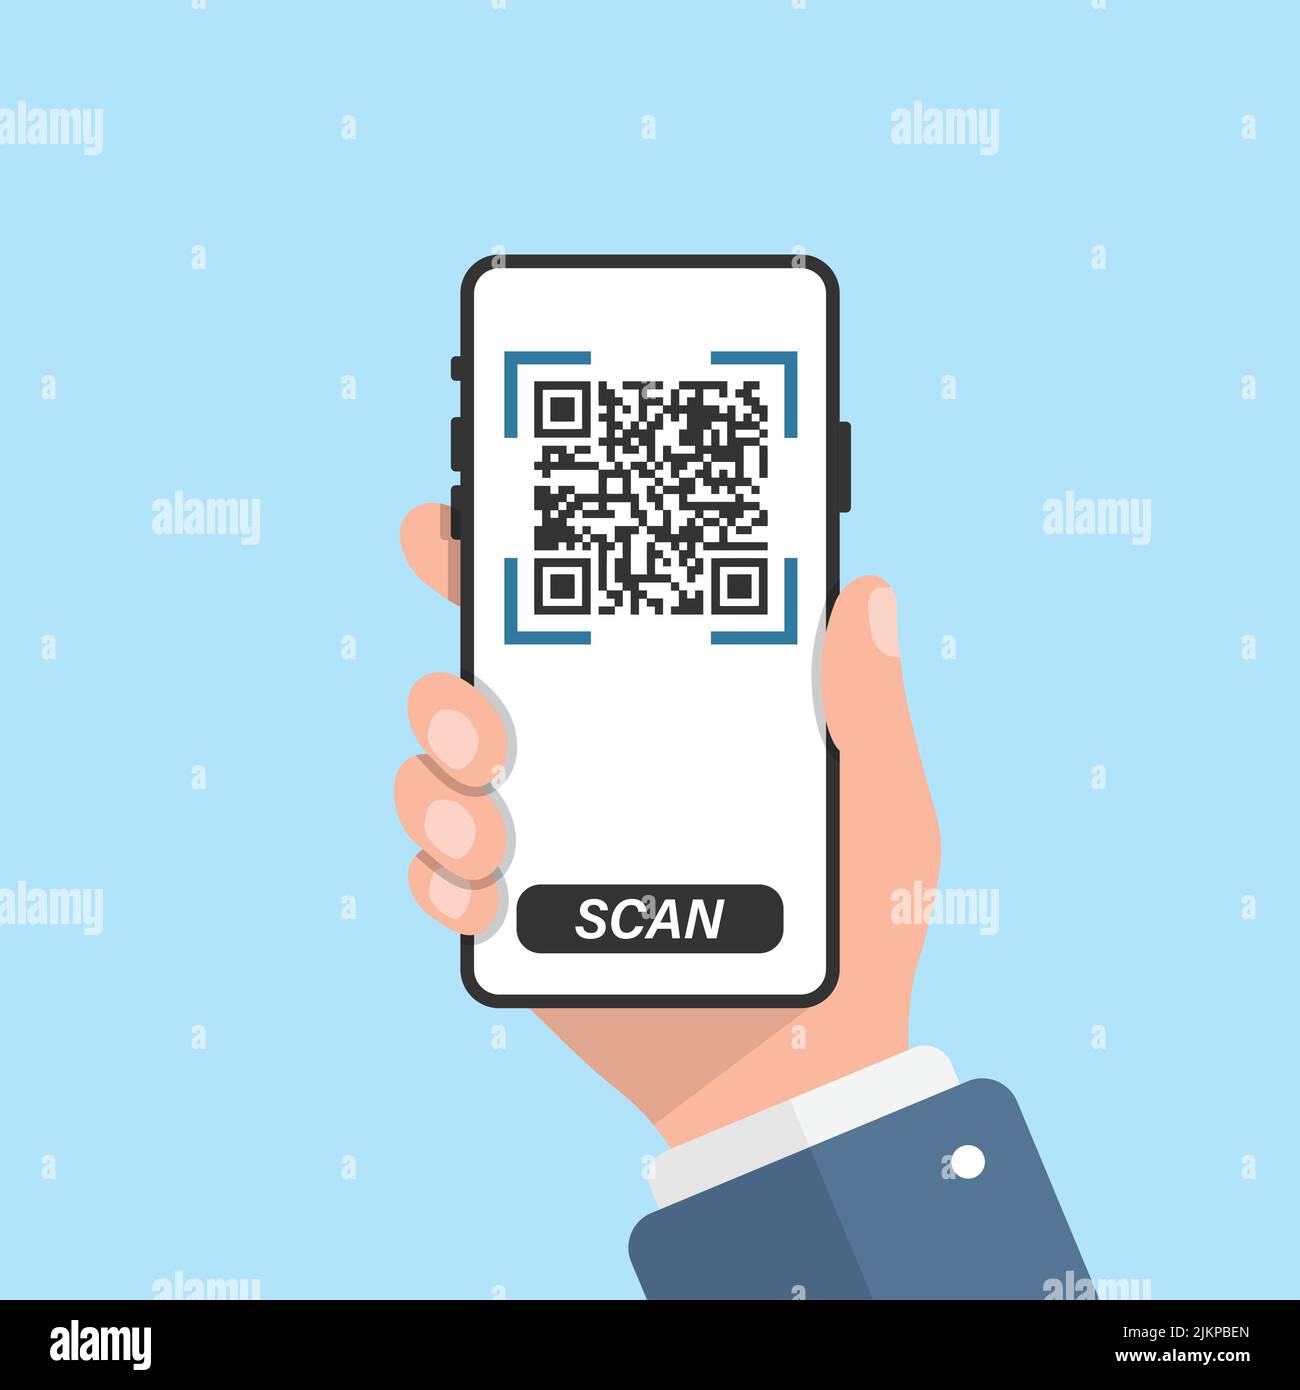 QR code scan illustration in flat style. Mobile phone scanning vector illustration on isolated background. Barcode reader in hand sign business concep Stock Vector